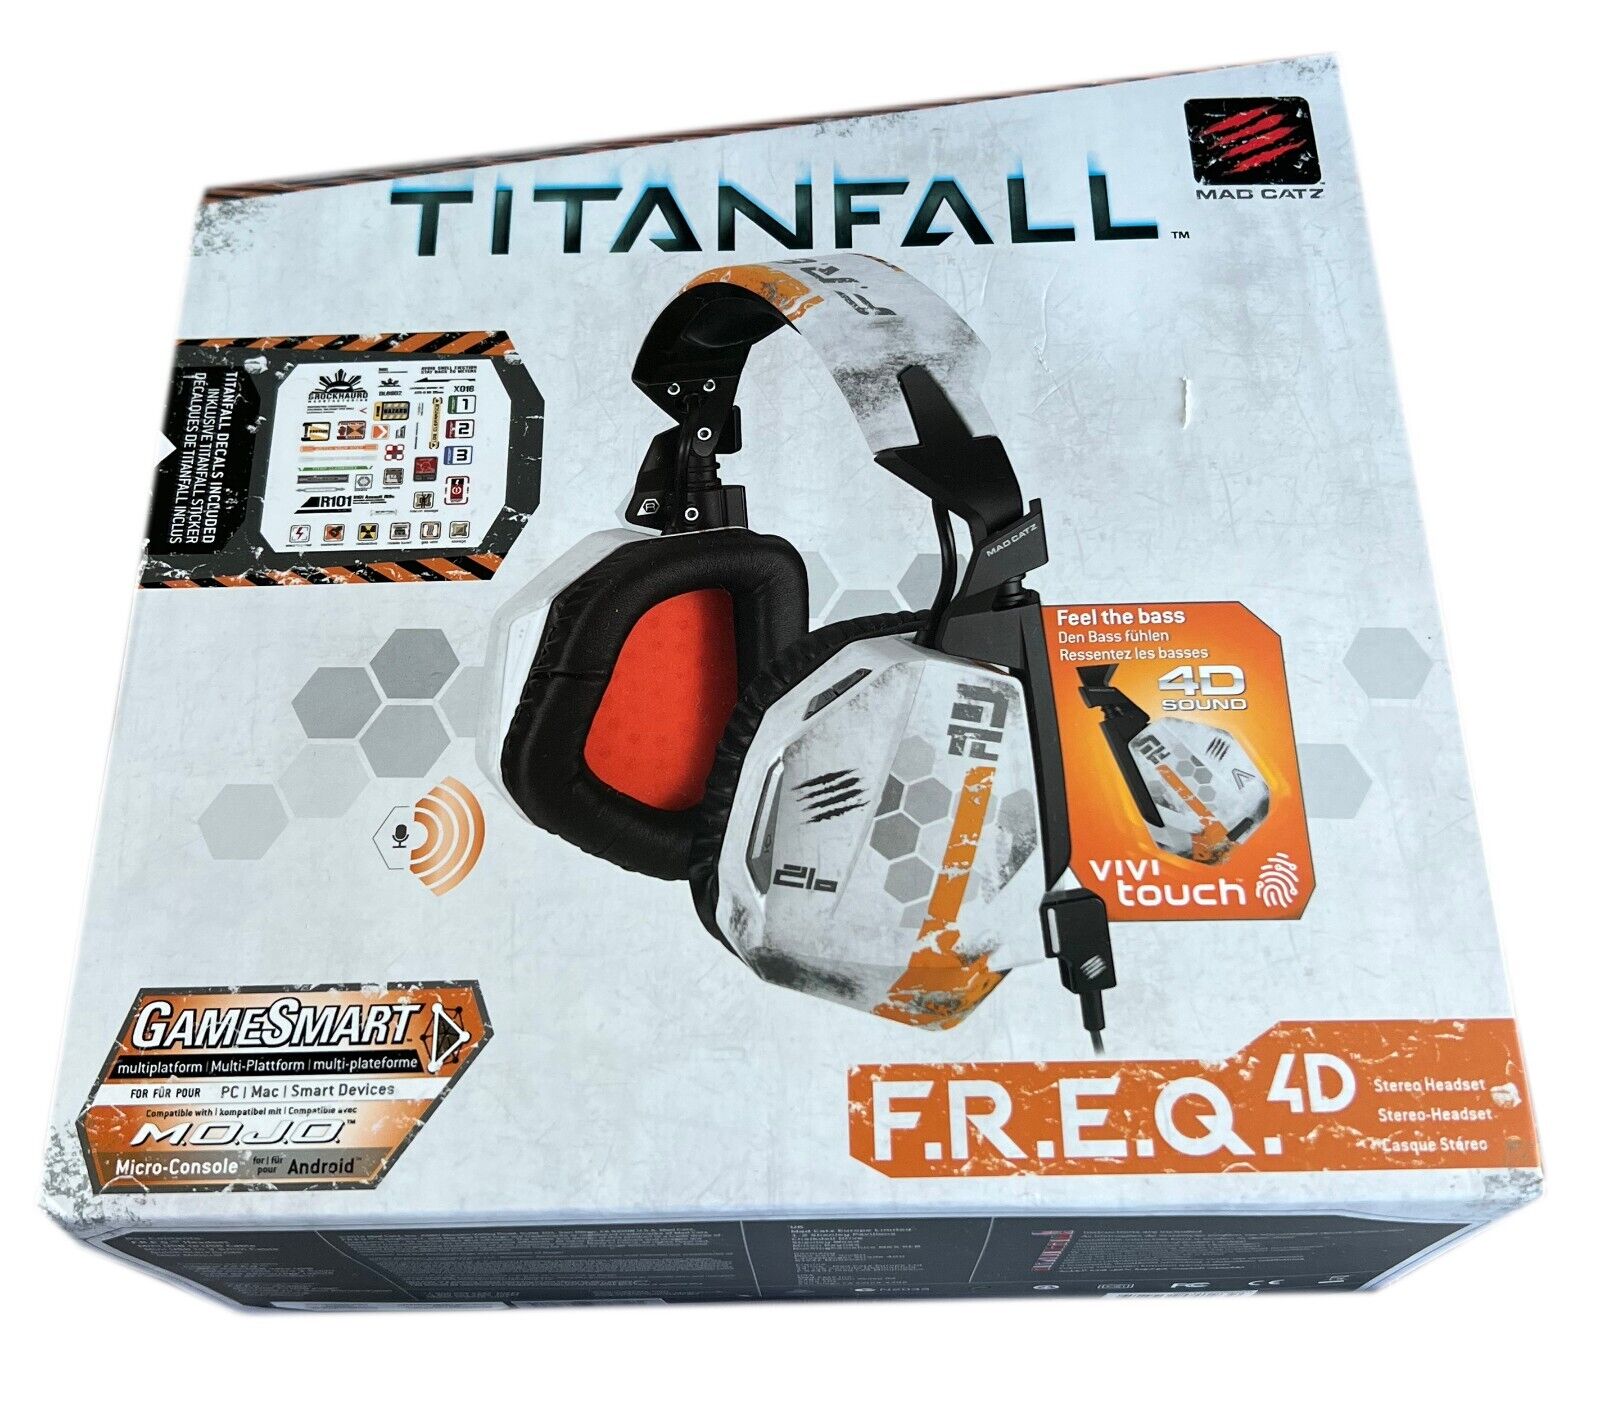 New Mad Catz Titanfall F.R.E.Q. 4D Stereo Headset for PC, Mac, and Smart Device